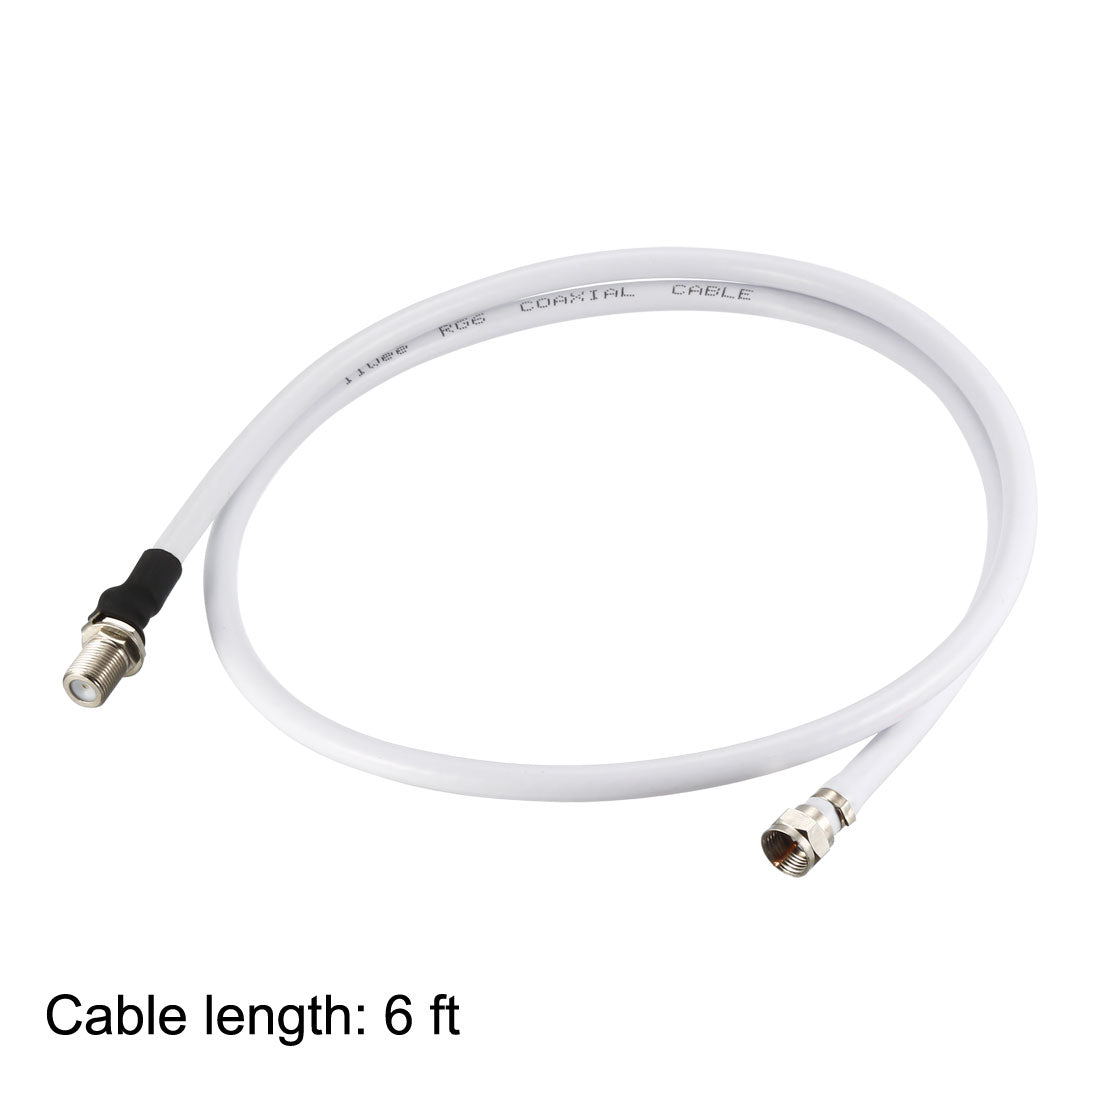 uxcell Uxcell RG6 Coax Cable F Type Male to F Type Female Coaxial Cable 2pcs